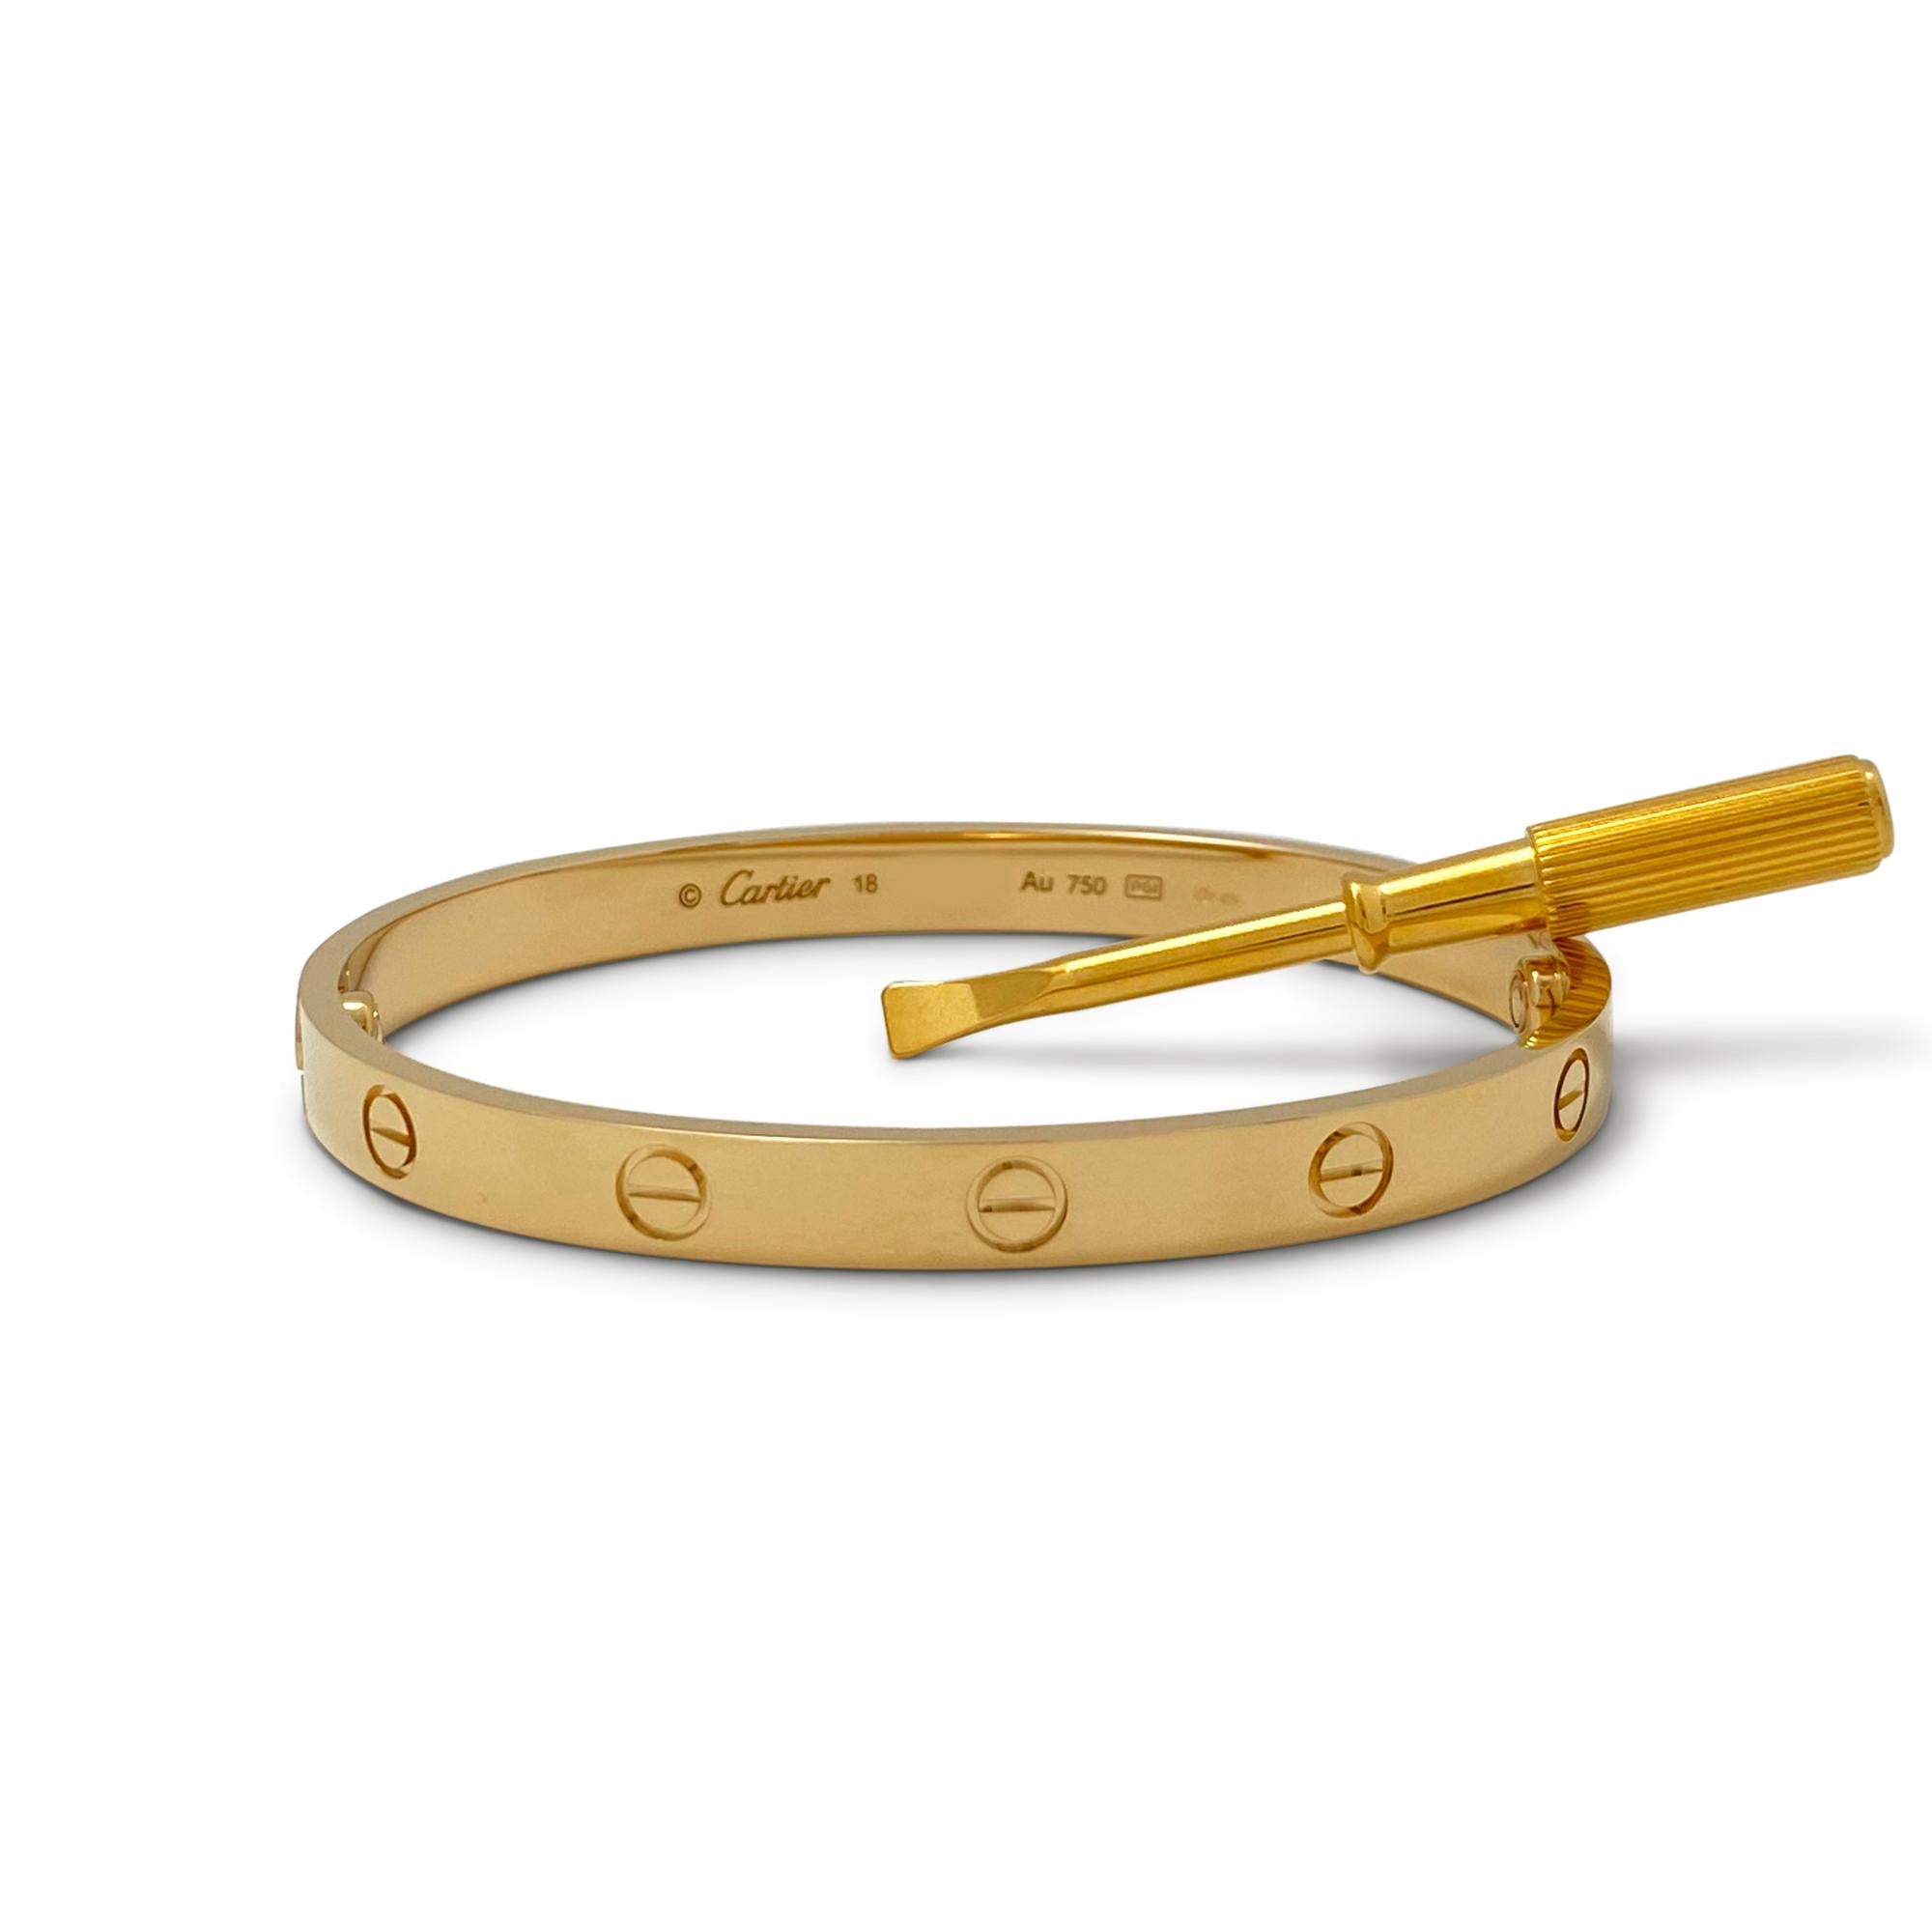 Authentic Cartier 'Love' bracelet crafted in 18 karat yellow gold. Size 18. Signed Cartier, 18, Au750, with serial number and hallmarks. The bracelet is presented with the original box, papers, and screwdriver. 
CIRCA 2010s

Brand: Cartier
Metal: